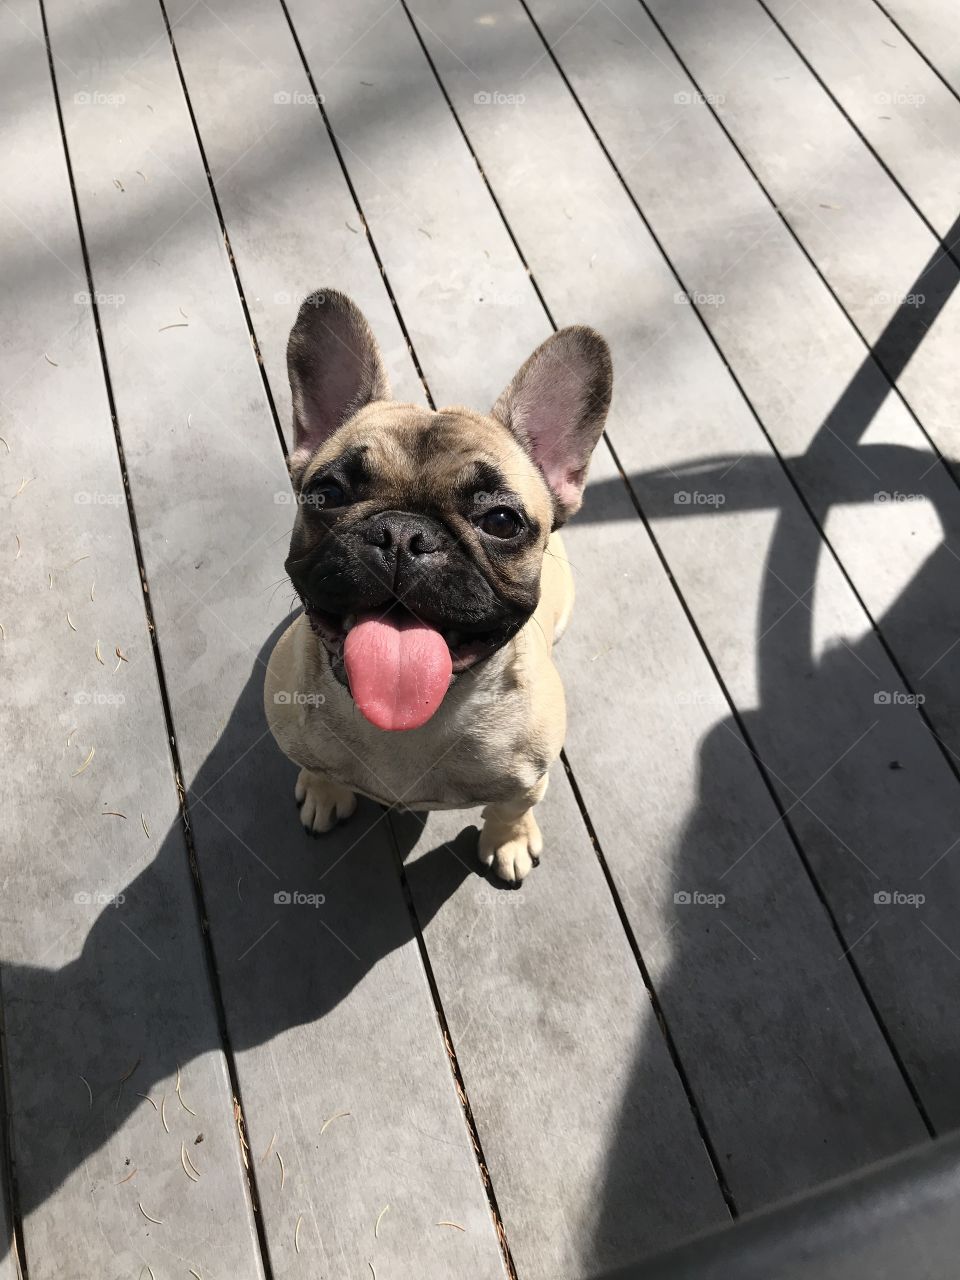 Frenchies have the silliest faces. This cutie is wondering how her tongue actually fits in her mouth...